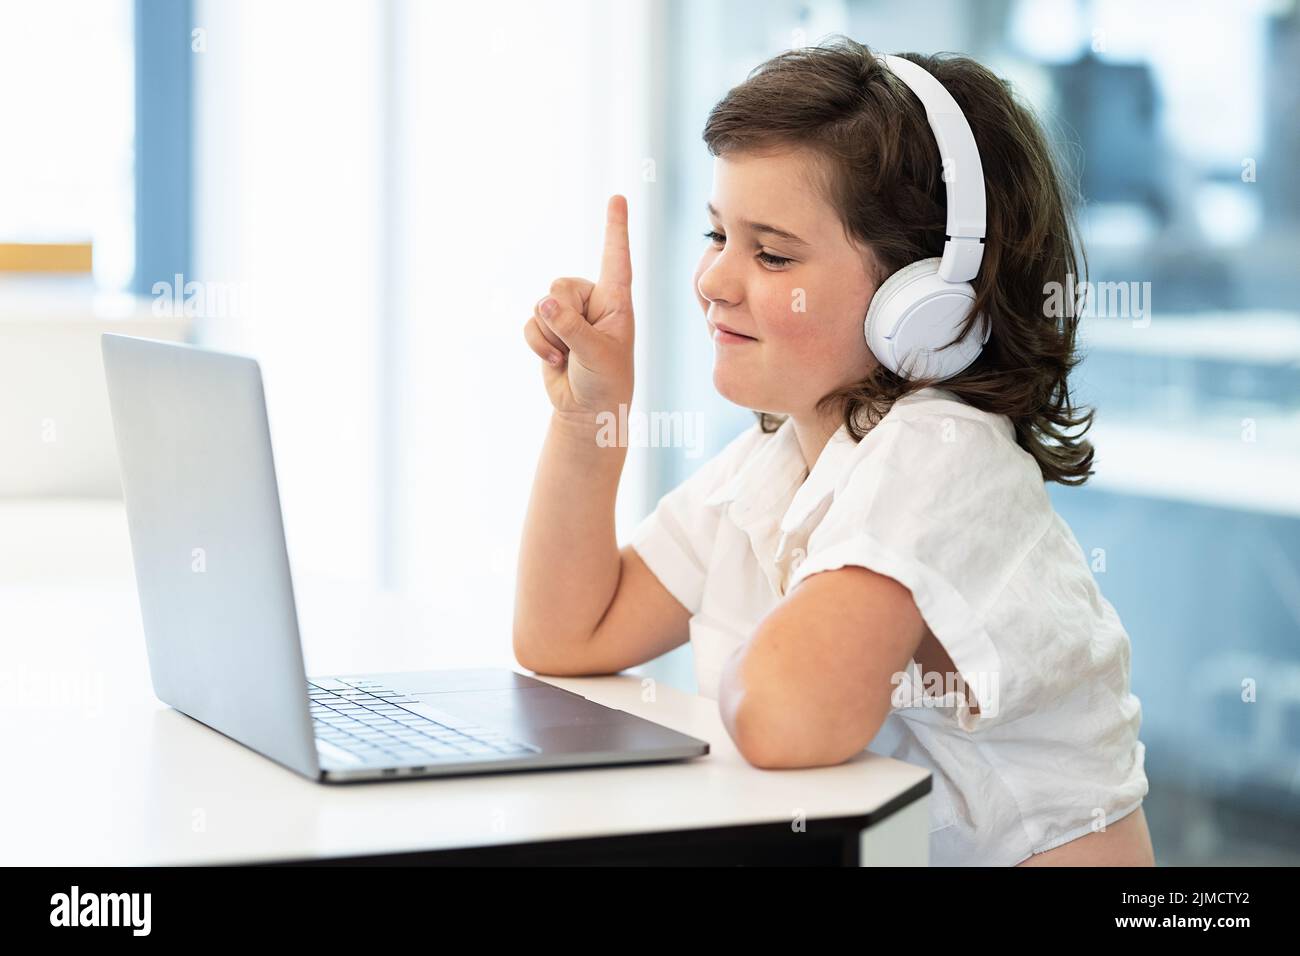 Side view of girl with headphones on her head sitting in front of a laptop during video chat waking at screen Stock Photo